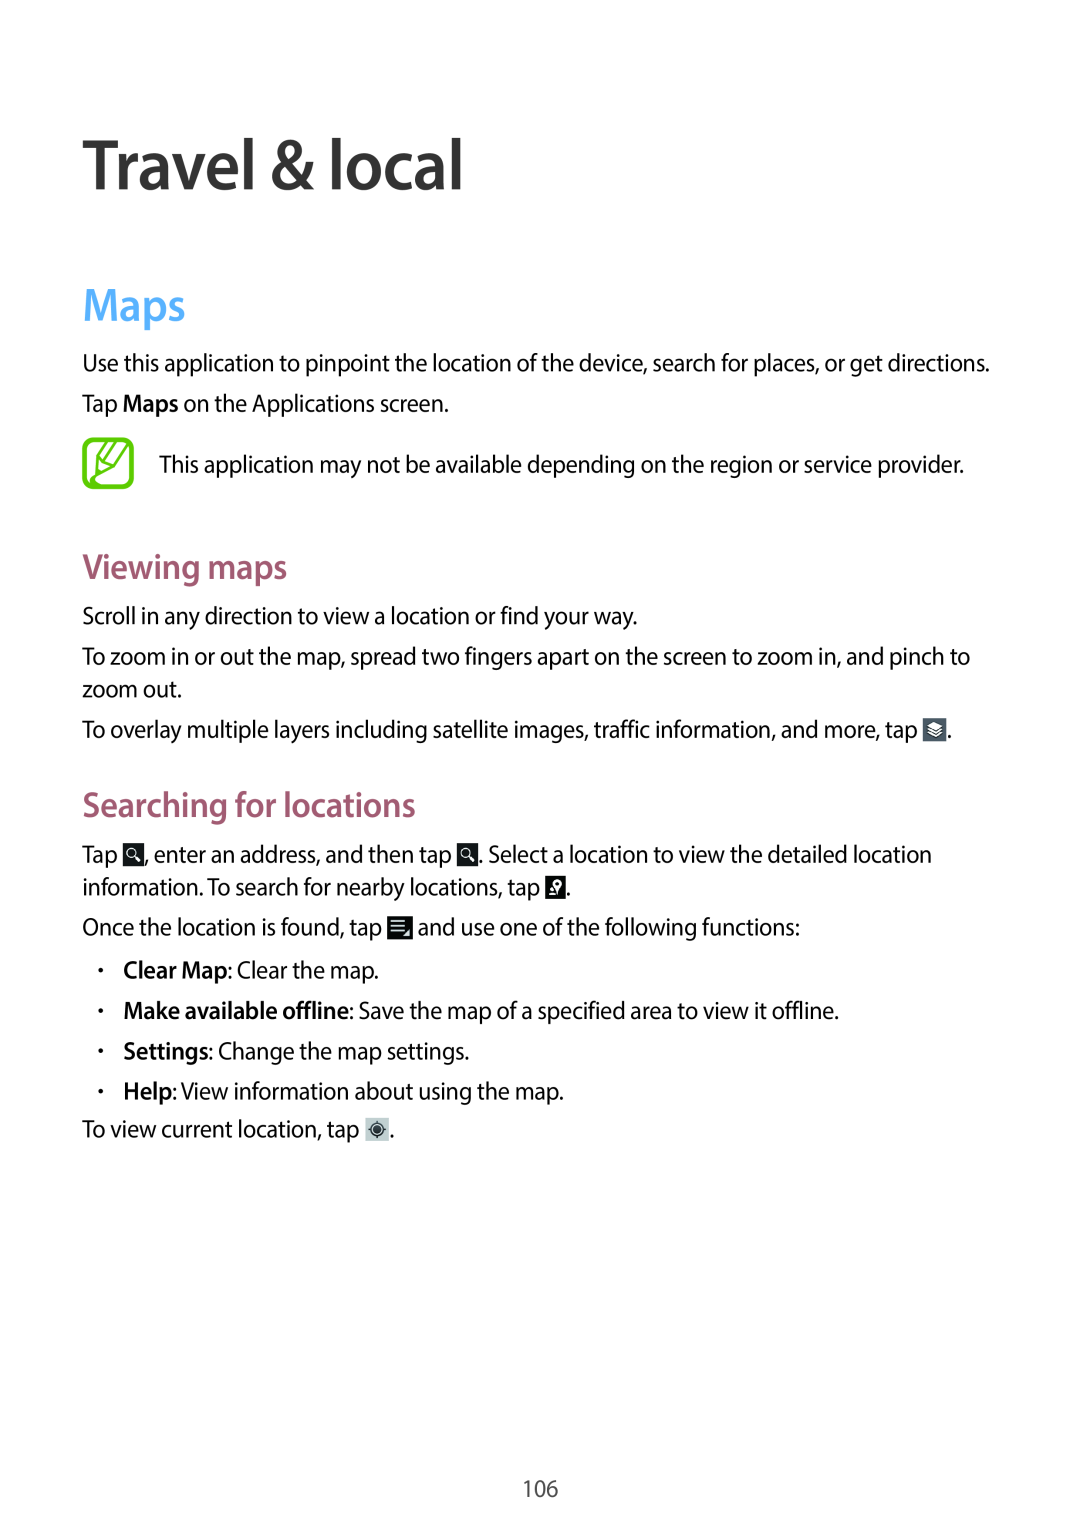 Samsung EK-GC100 user manual Travel & local, Maps, Viewing maps, Searching for locations 